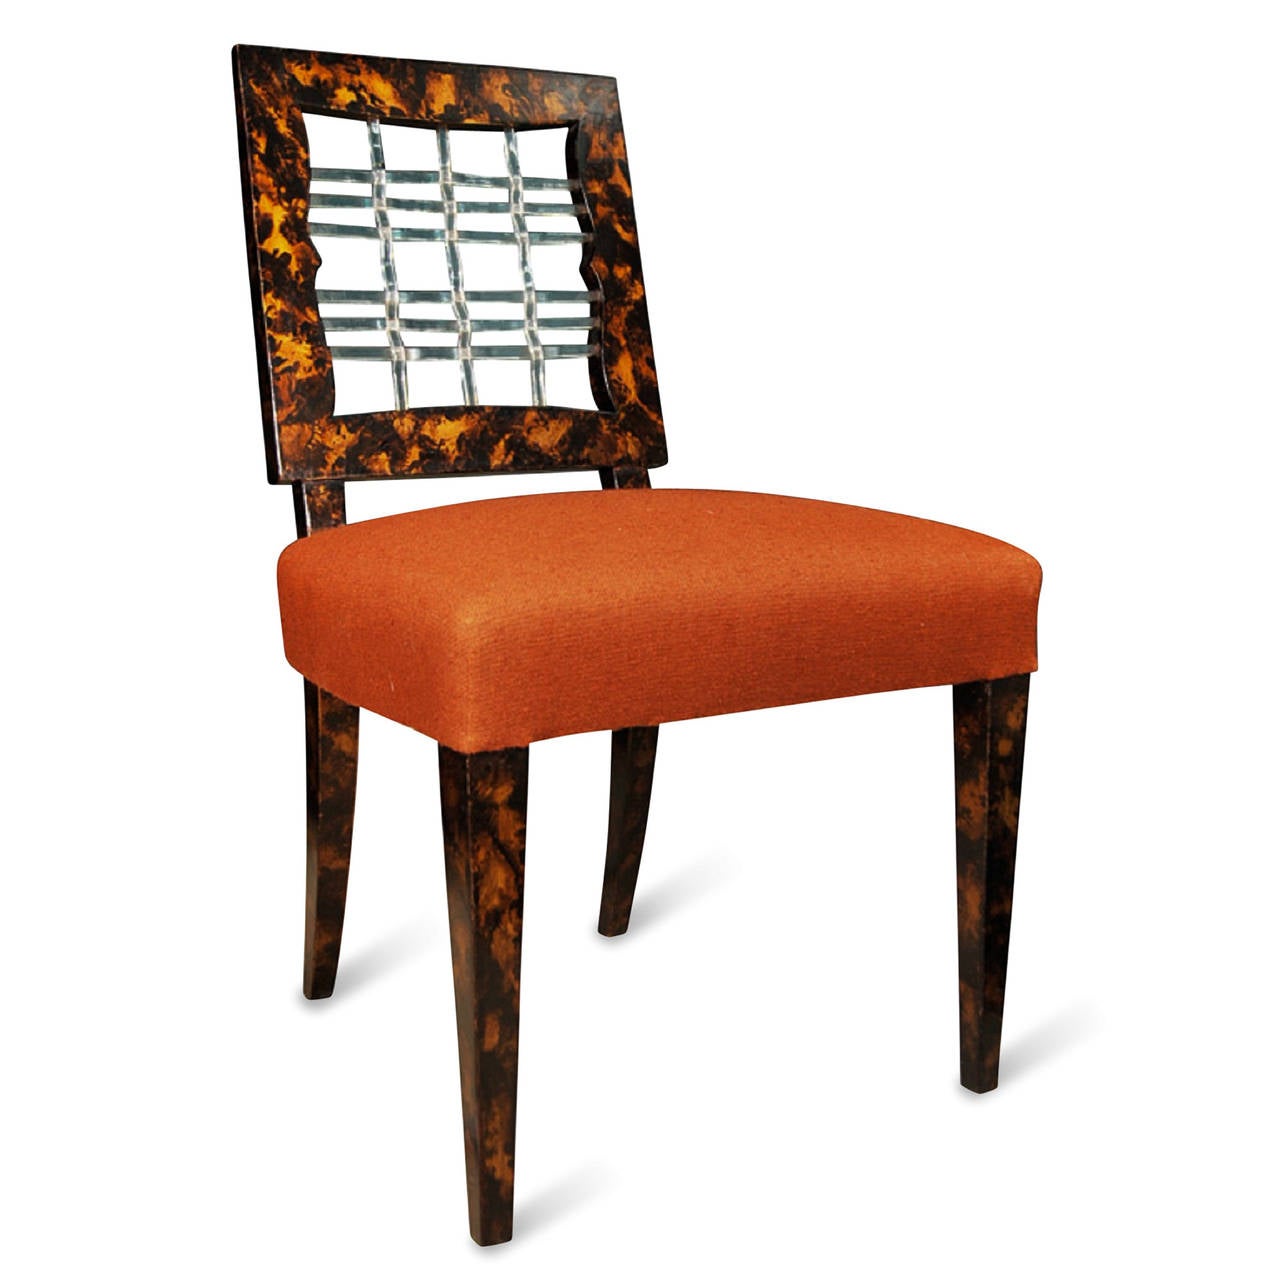 Rare vanity chair with faux tortoise frame and lucite ribbing by Grosfeld House, American 1930s, 33